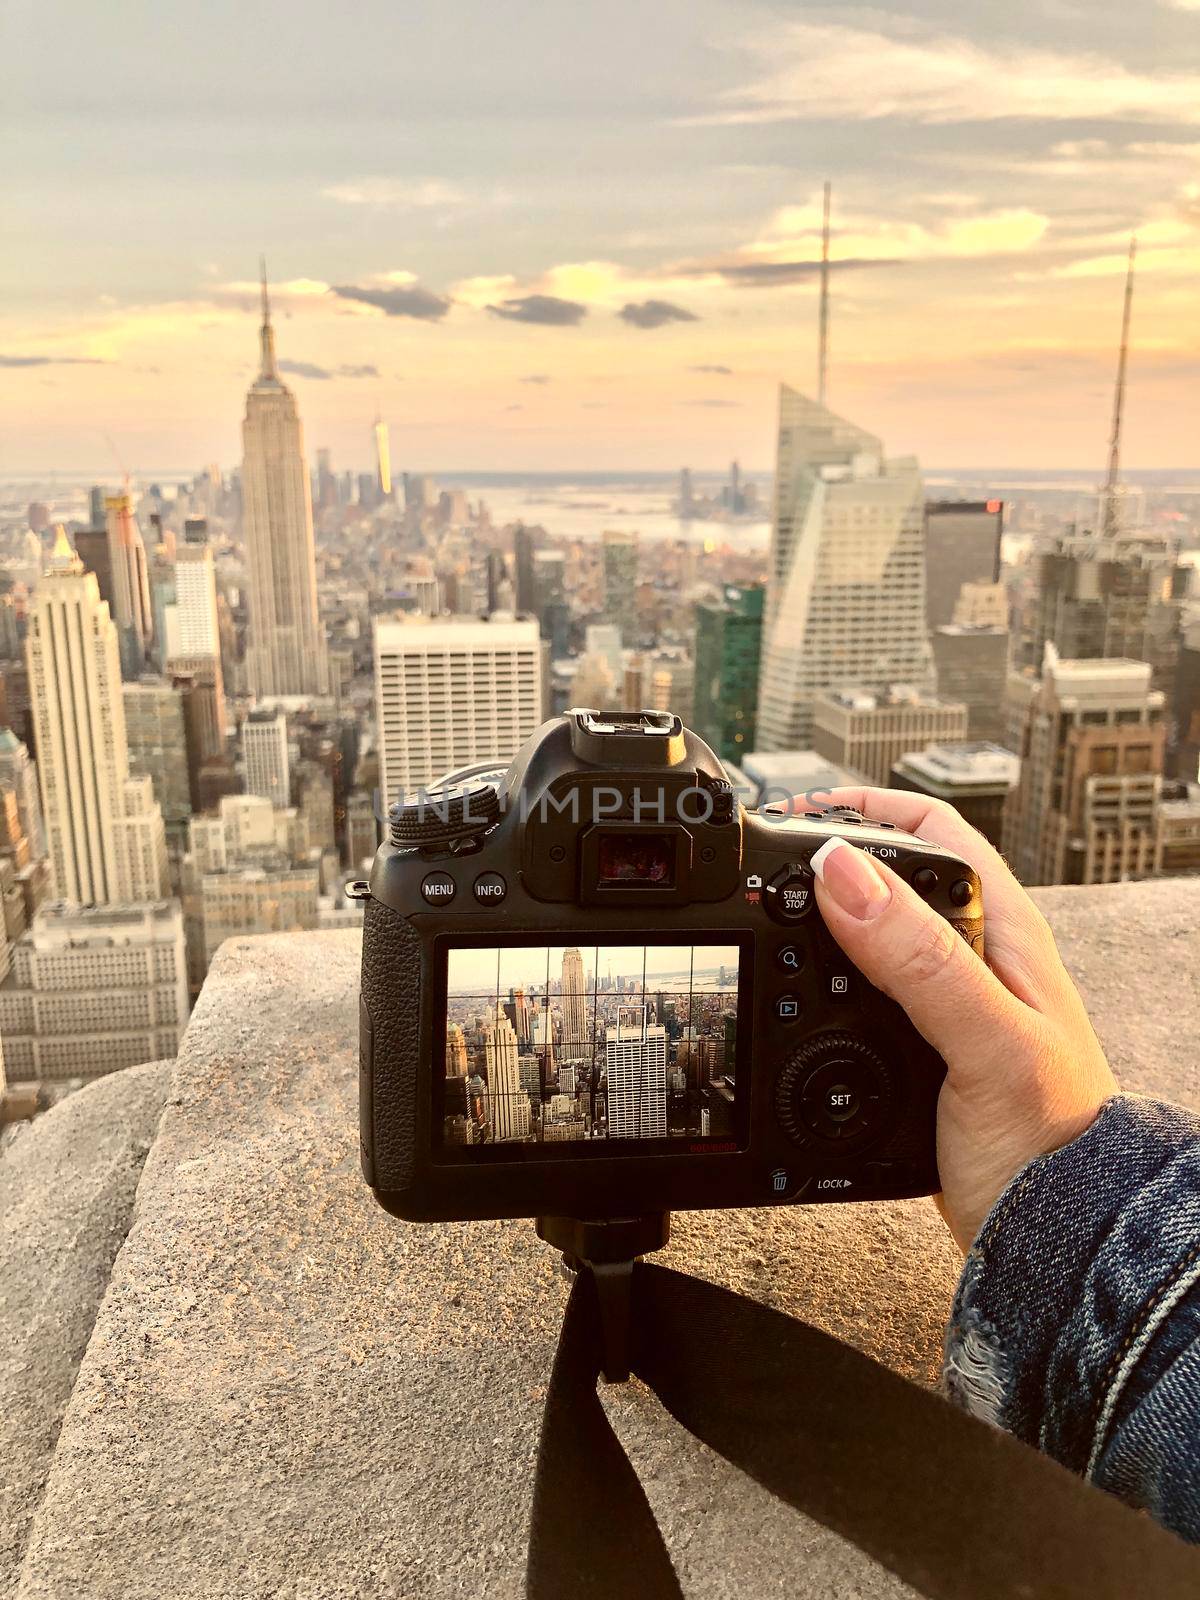 Female Hand With camera taking picture of new york city skyline on a rooftop